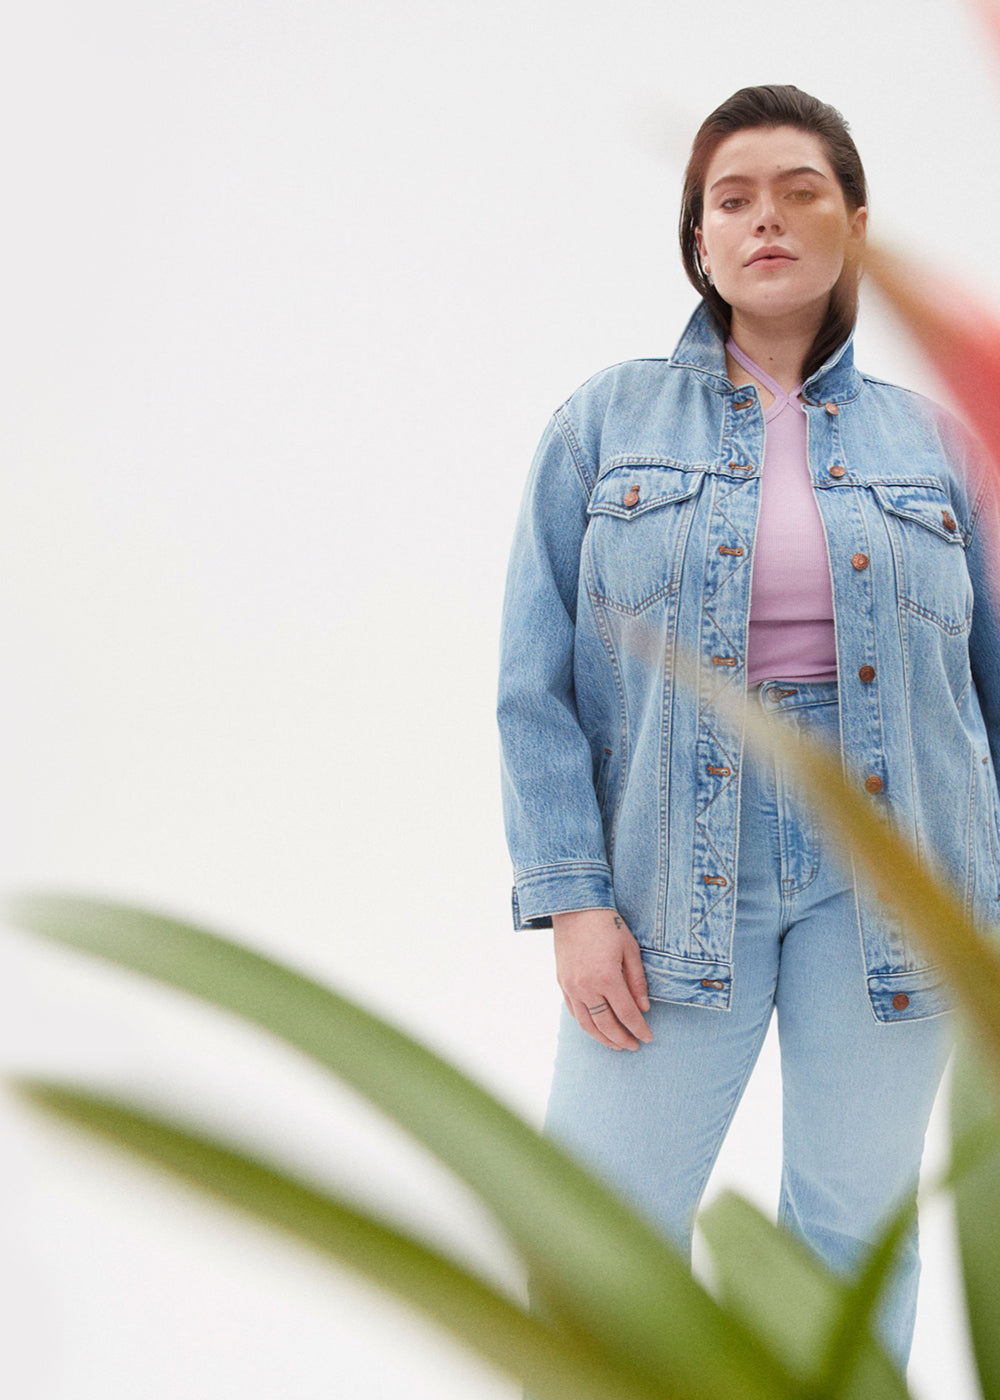 Individual posing behind a bromeliad wearing a Madewell denim jacket, Madewell jeans, and a Madewell lavender halter tank top